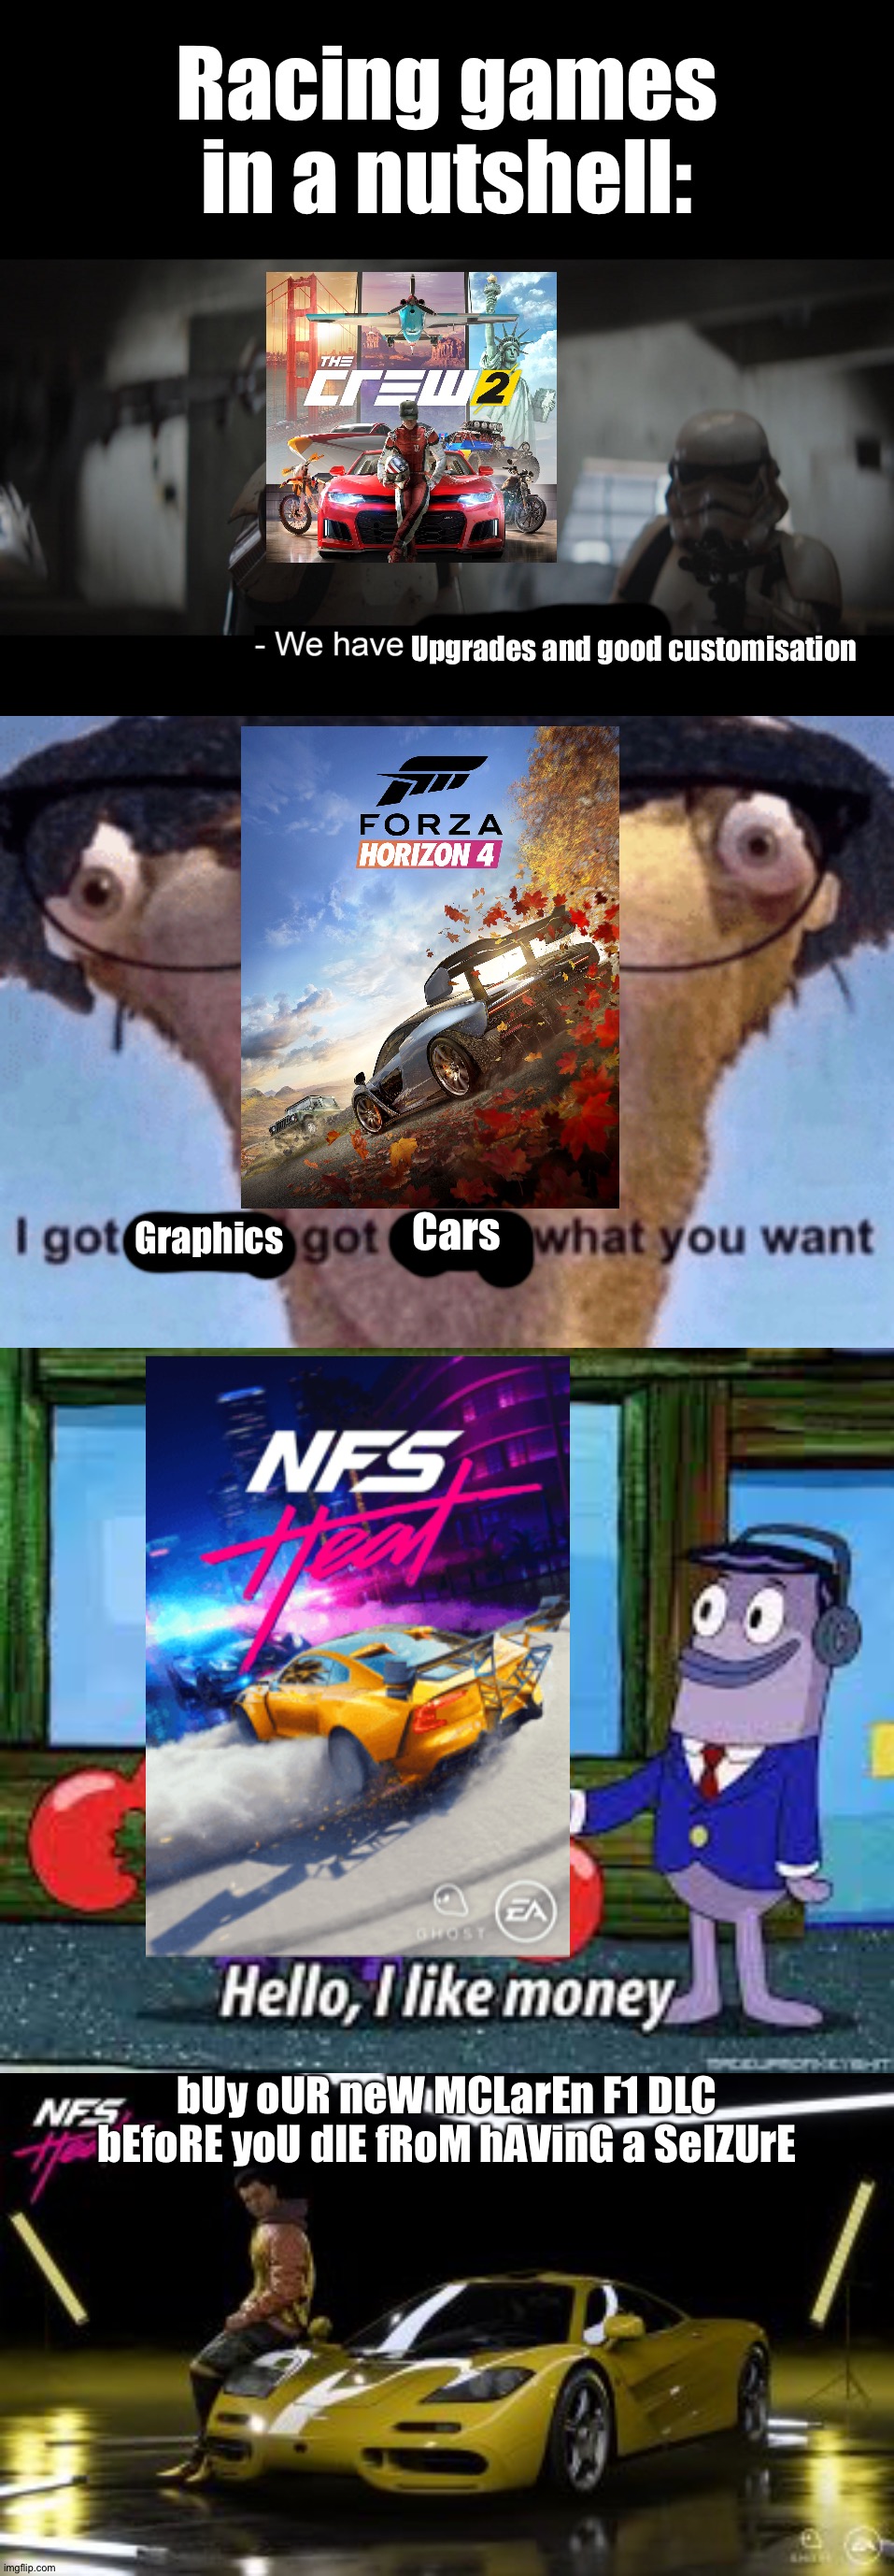 Racing games be like: | Racing games in a nutshell:; Upgrades and good customisation; Cars; Graphics; bUy oUR neW MCLarEn F1 DLC bEfoRE yoU dIE fRoM hAVinG a SeIZUrE | image tagged in memes,funny,gaming,nfs heat,forza horizon 4,the crew 2 | made w/ Imgflip meme maker